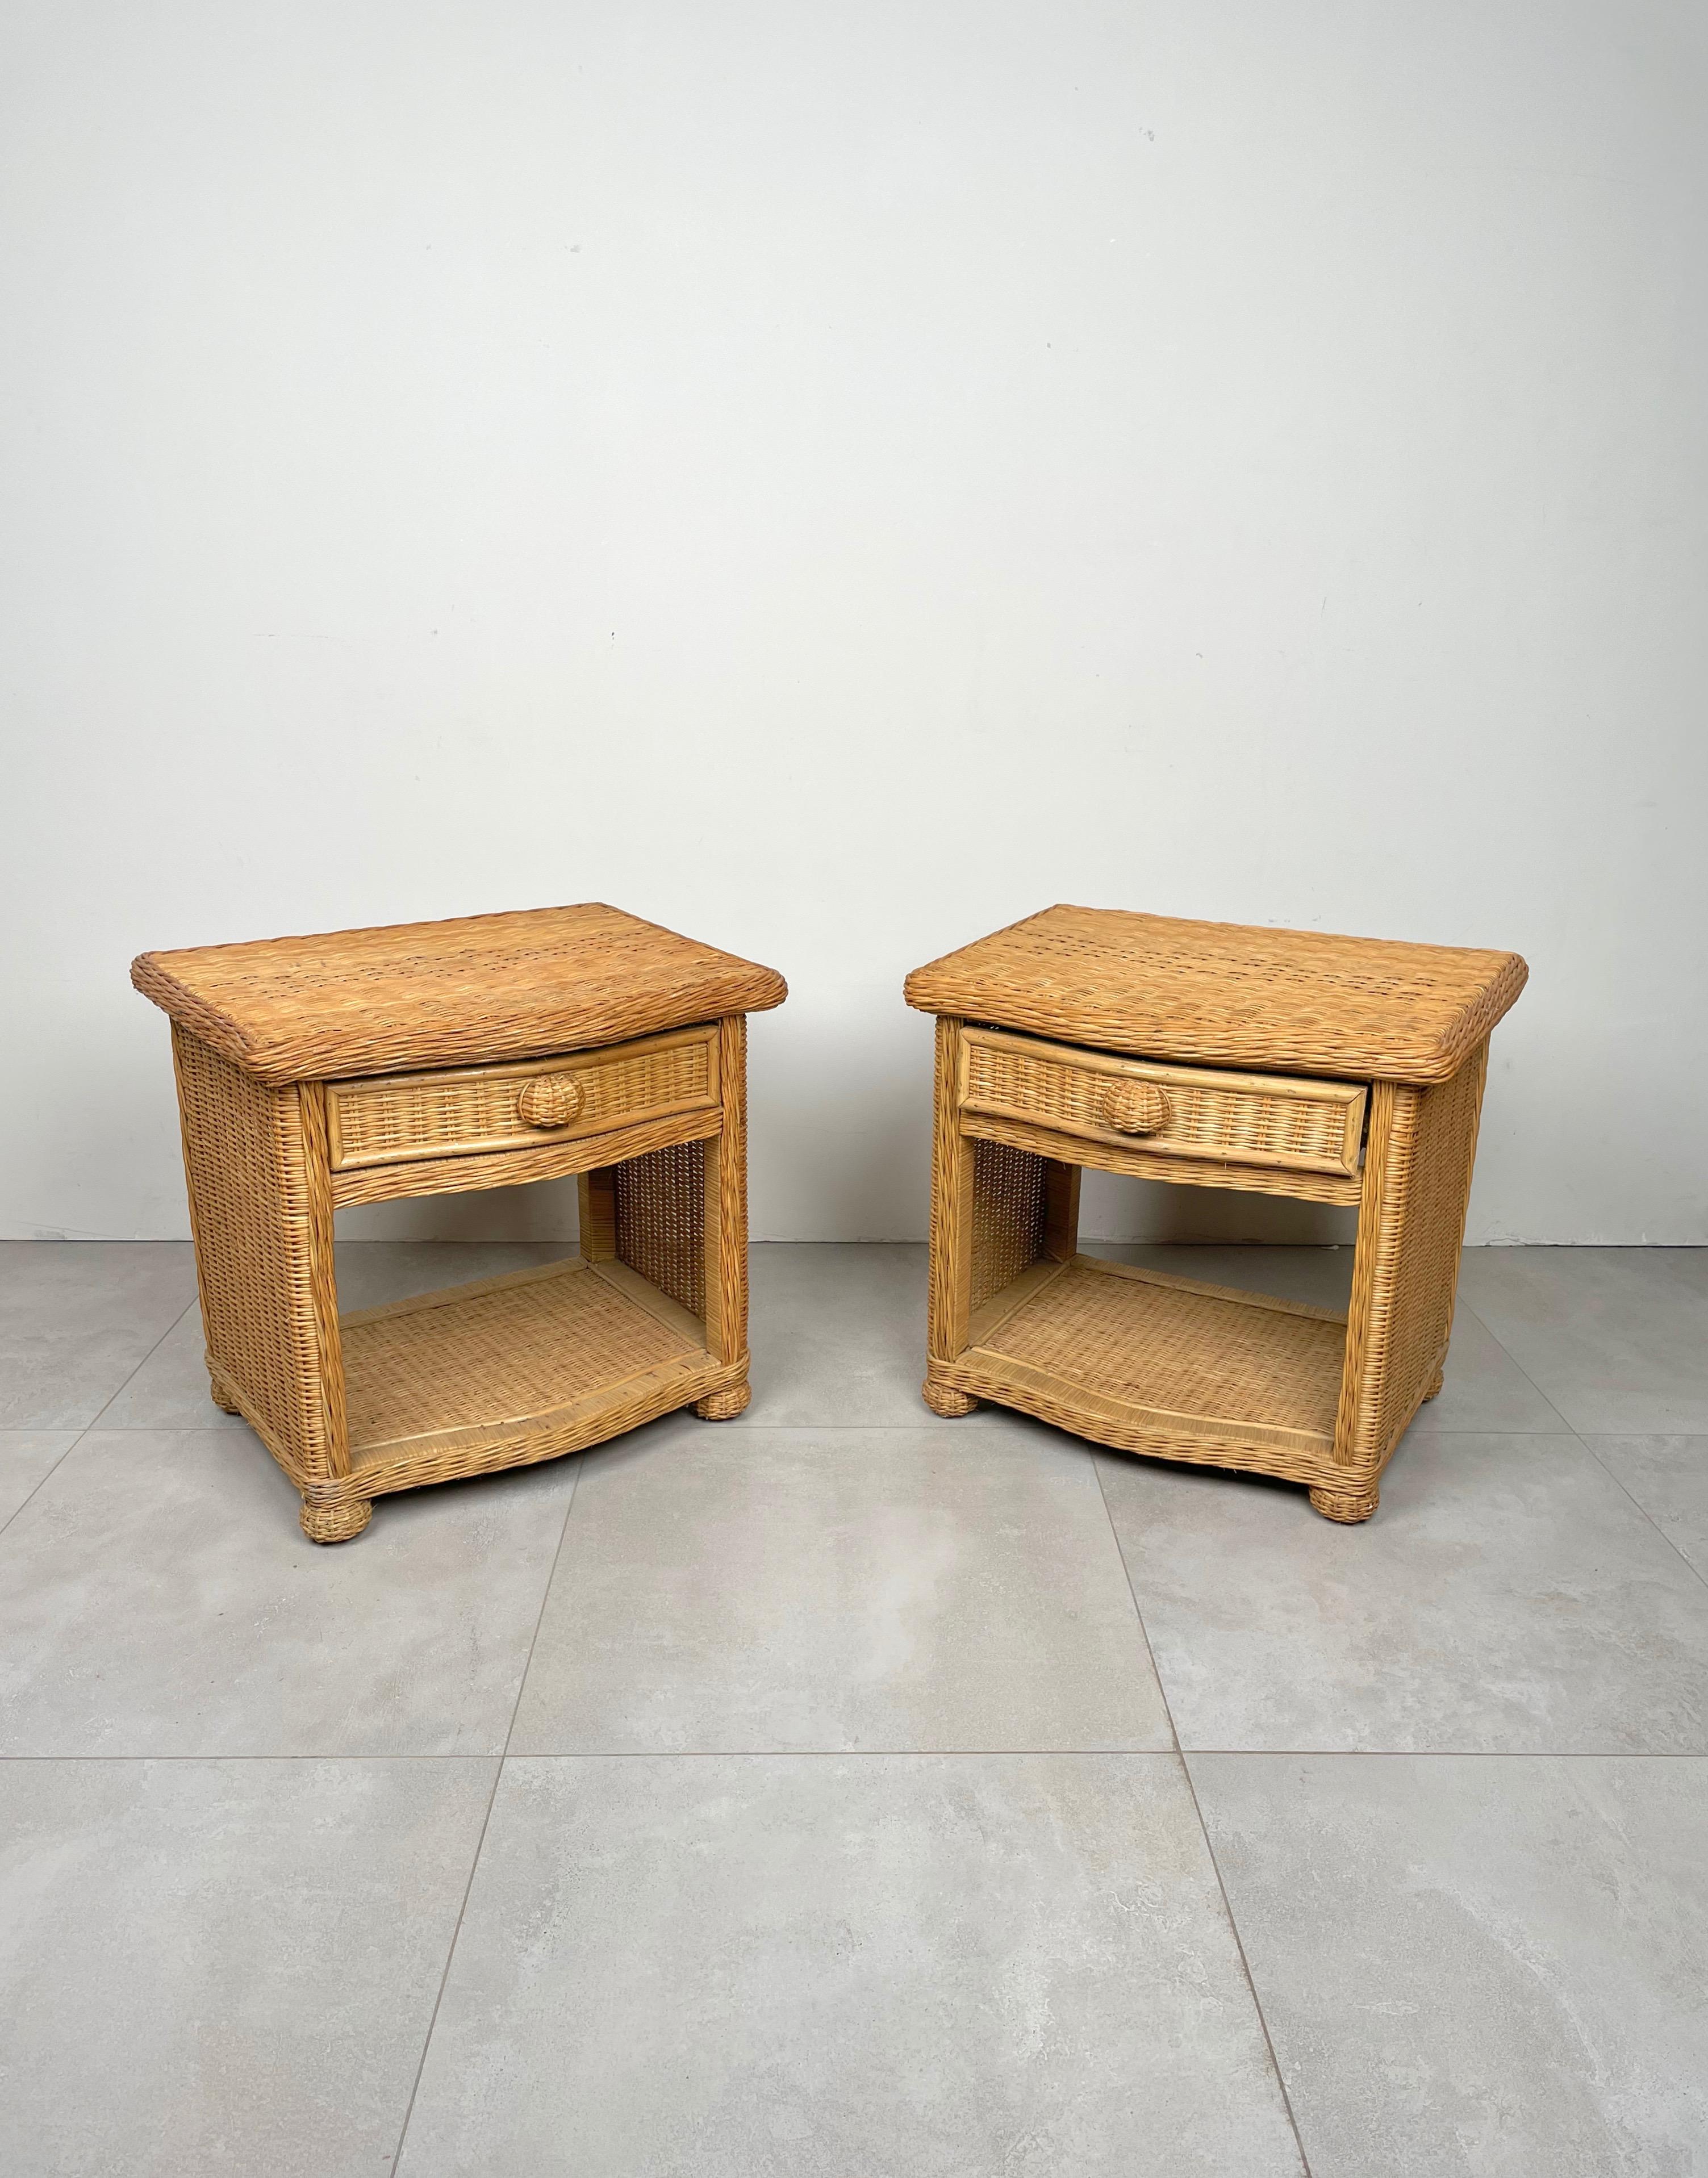 Pair of bed side tables in bamboo and rattan with drawers attributed to Vivai Del Sud. 

Made in Italy in the 1970s.